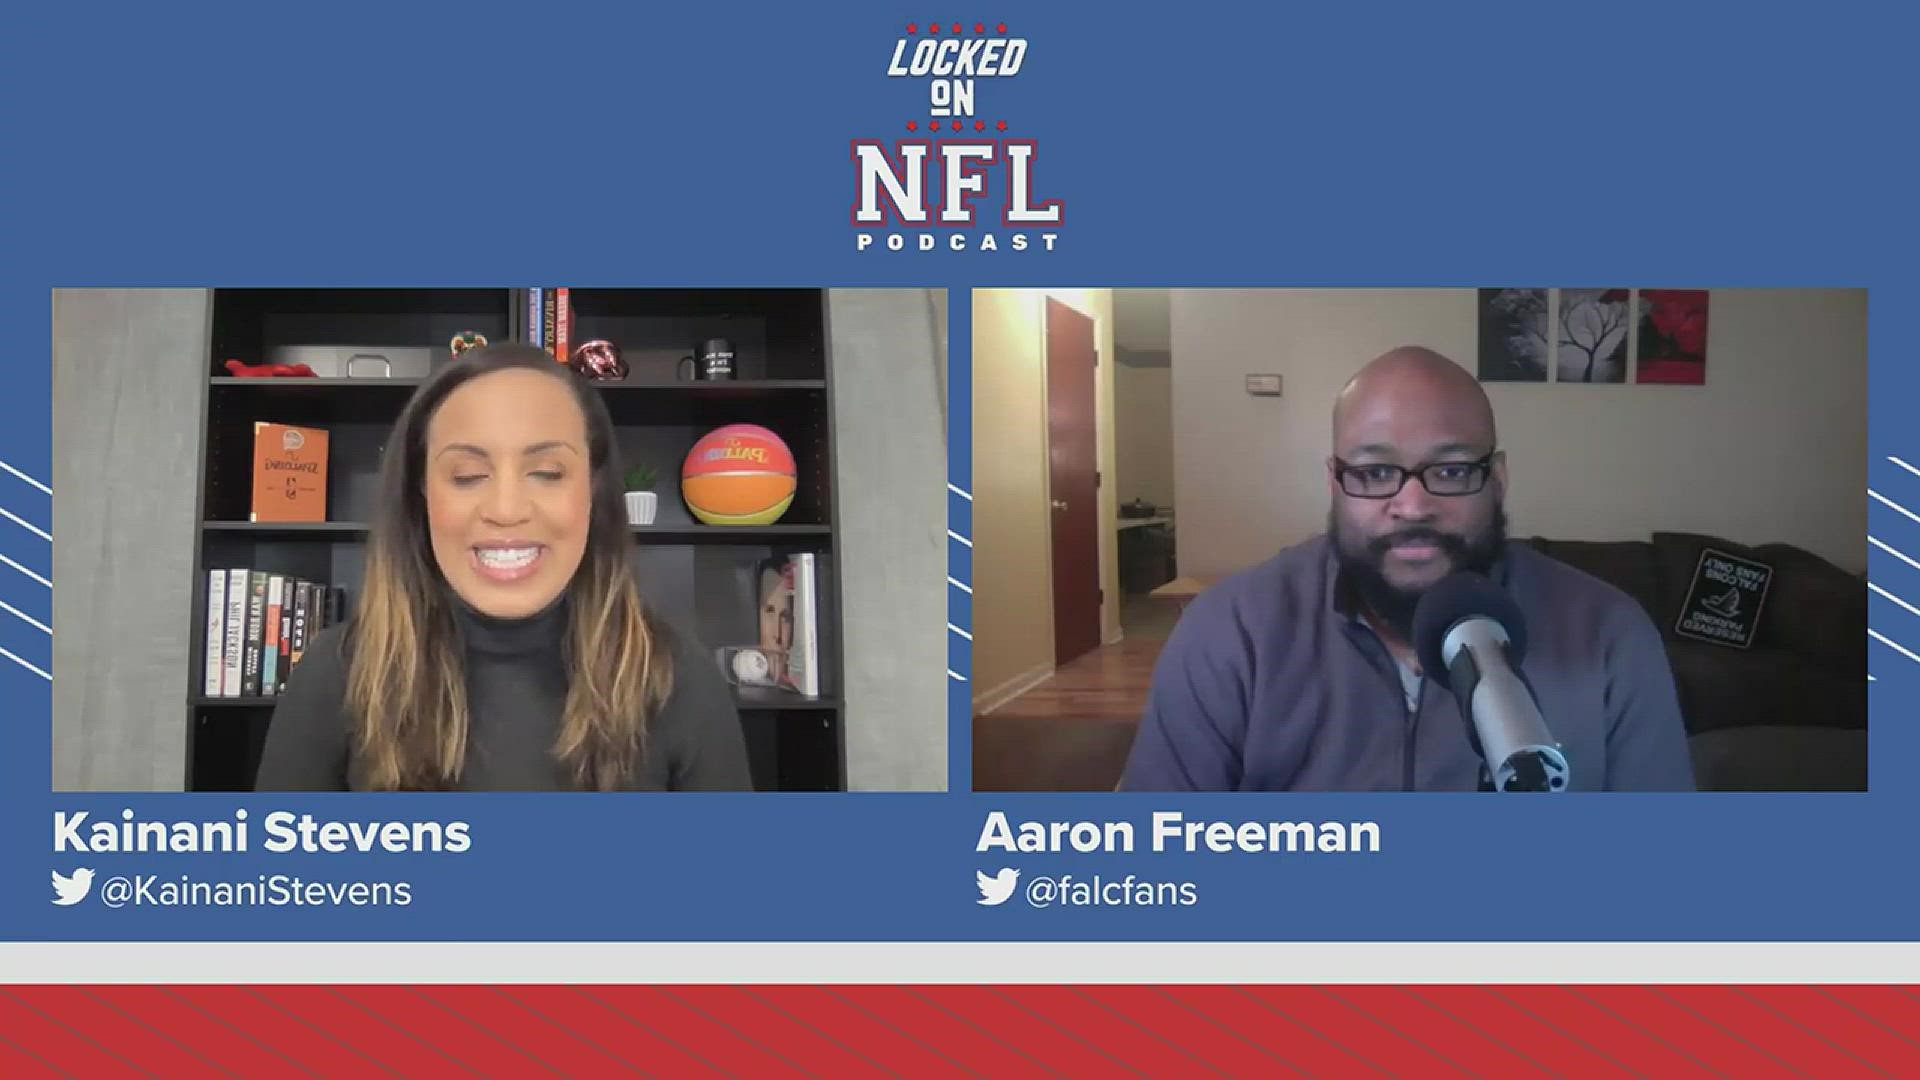 Locked On Falcons host Aaron Freeman joined Locked On national anchor Kainani Stevens on Monday night to discuss the trade and how Atlanta is going to move forward.